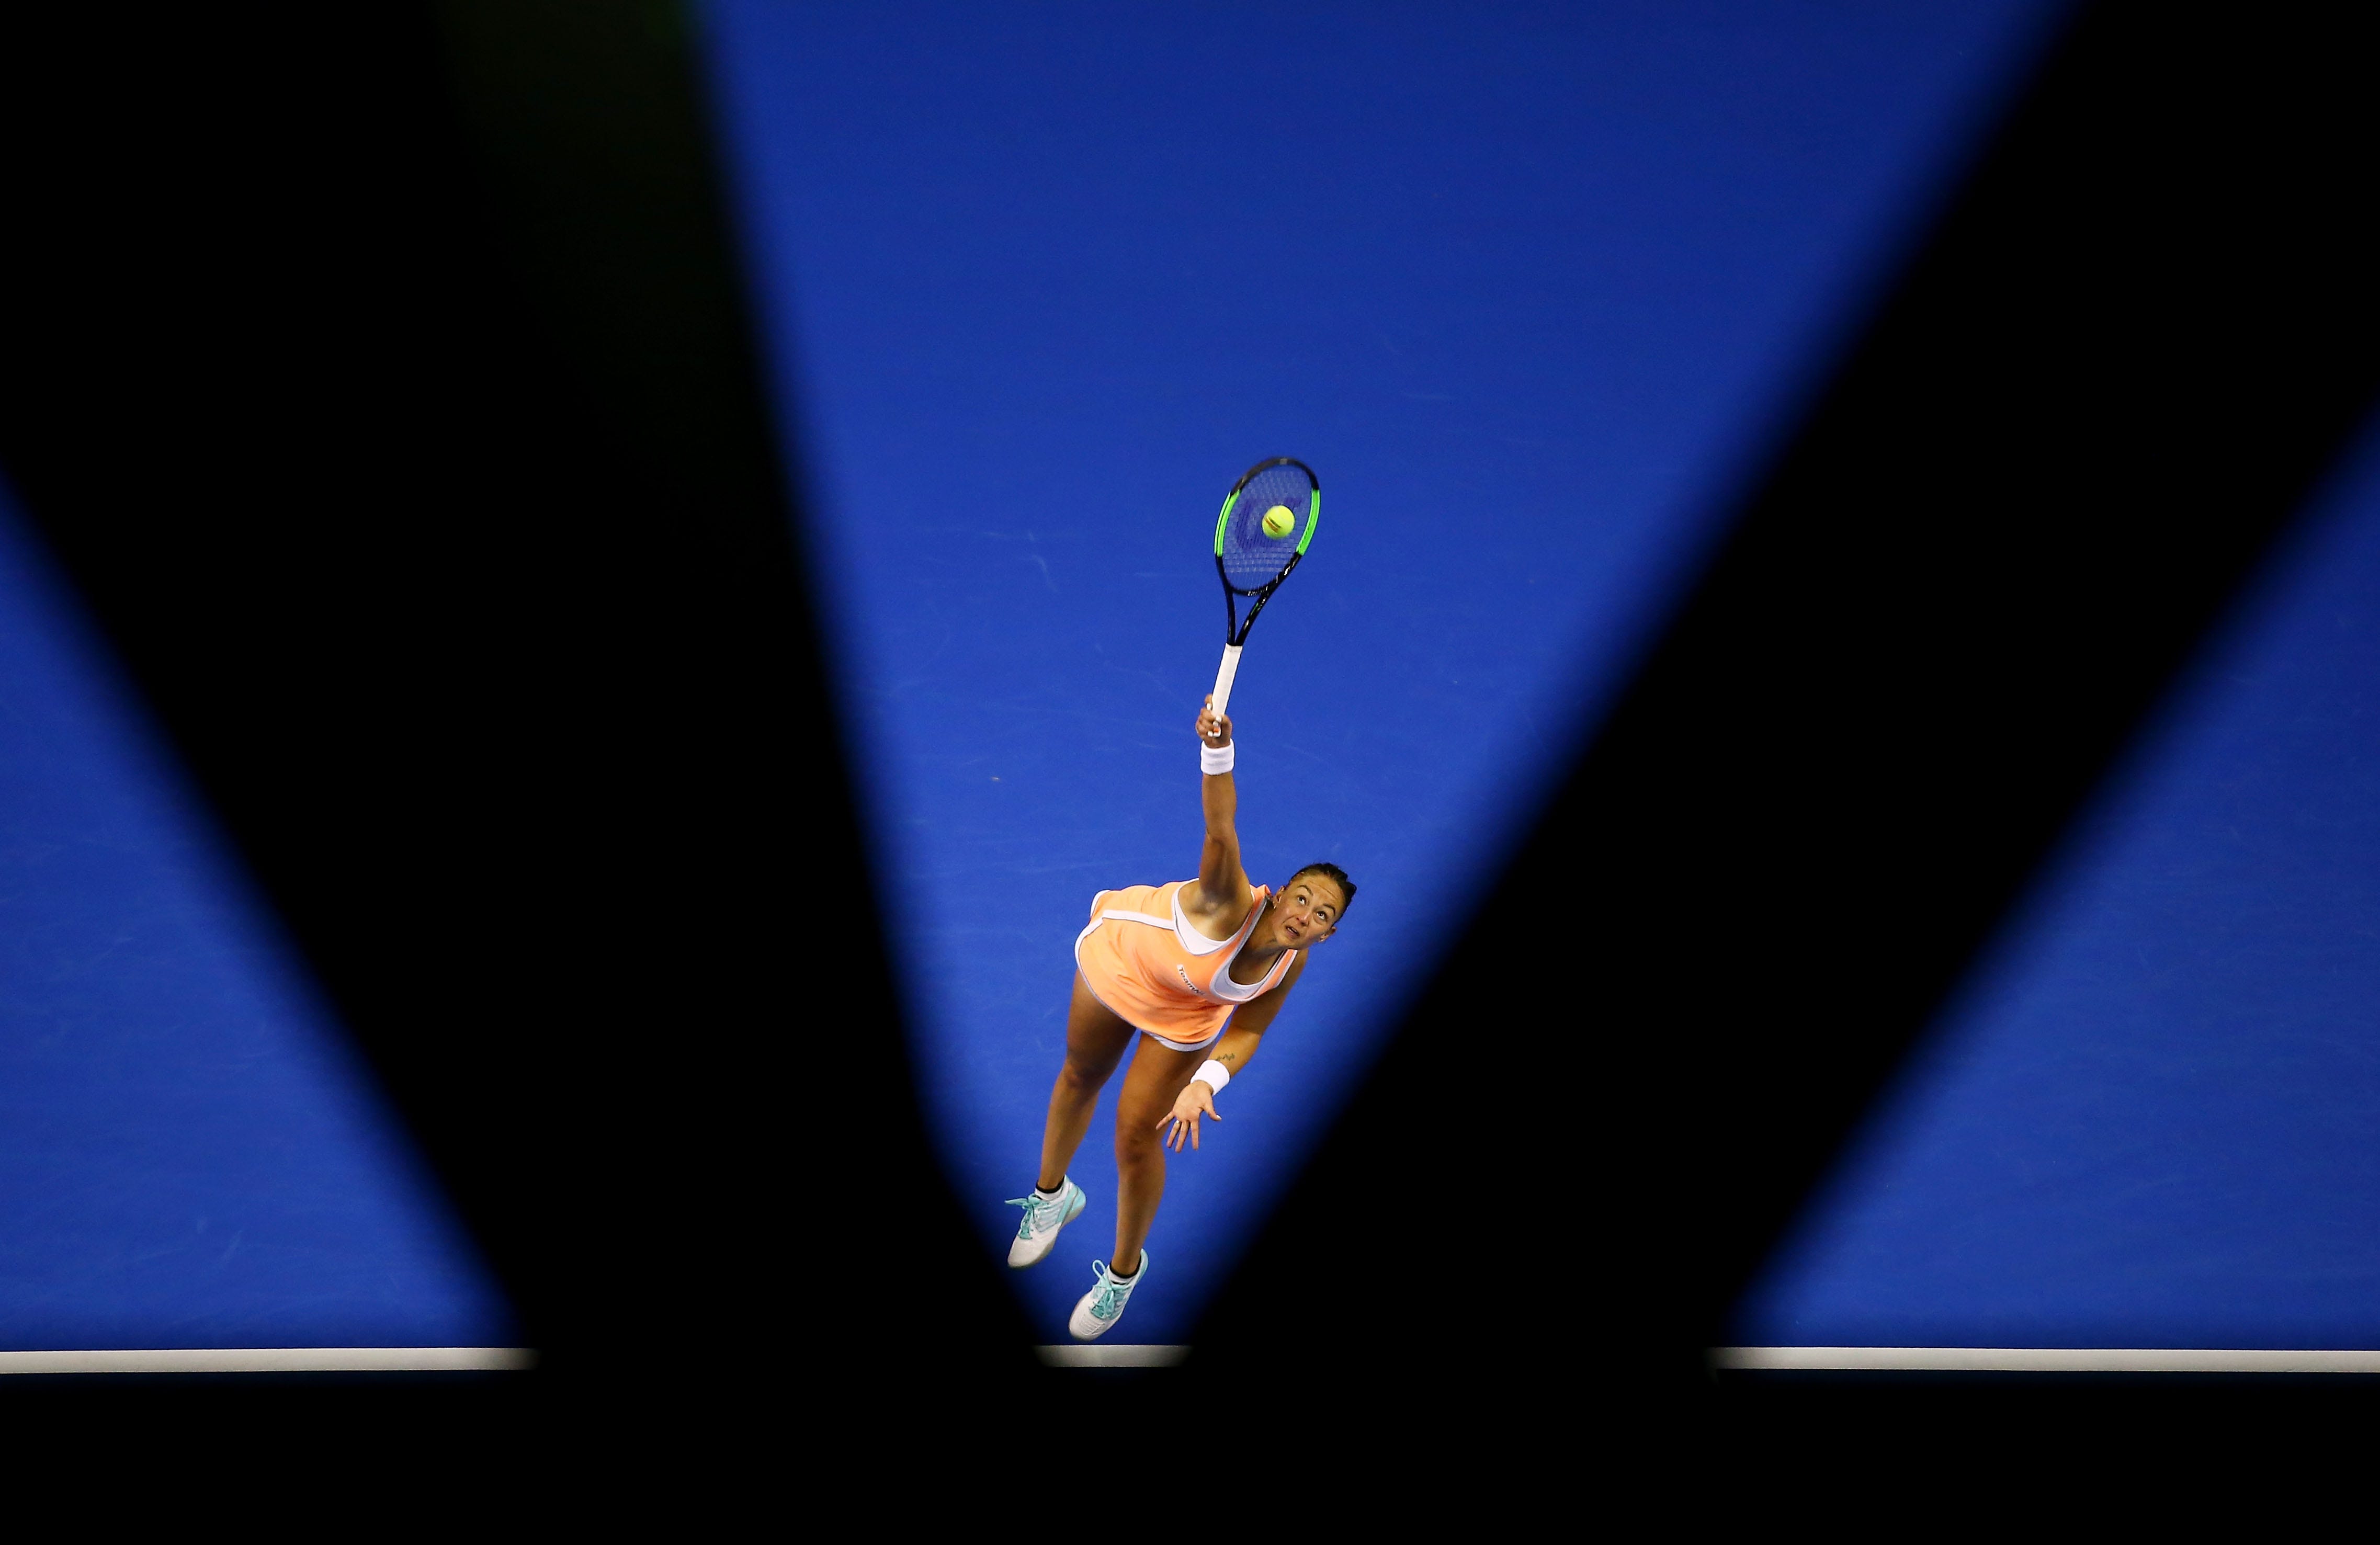 Lesley Kerkhove of the Netherlands serves in her match against Samantha Stosur of Australia during the World Group Play-Off Fed Cup tie between Australia and the Netherlands at the Wollongong Entertainment Centre in Wollongong, Australia.